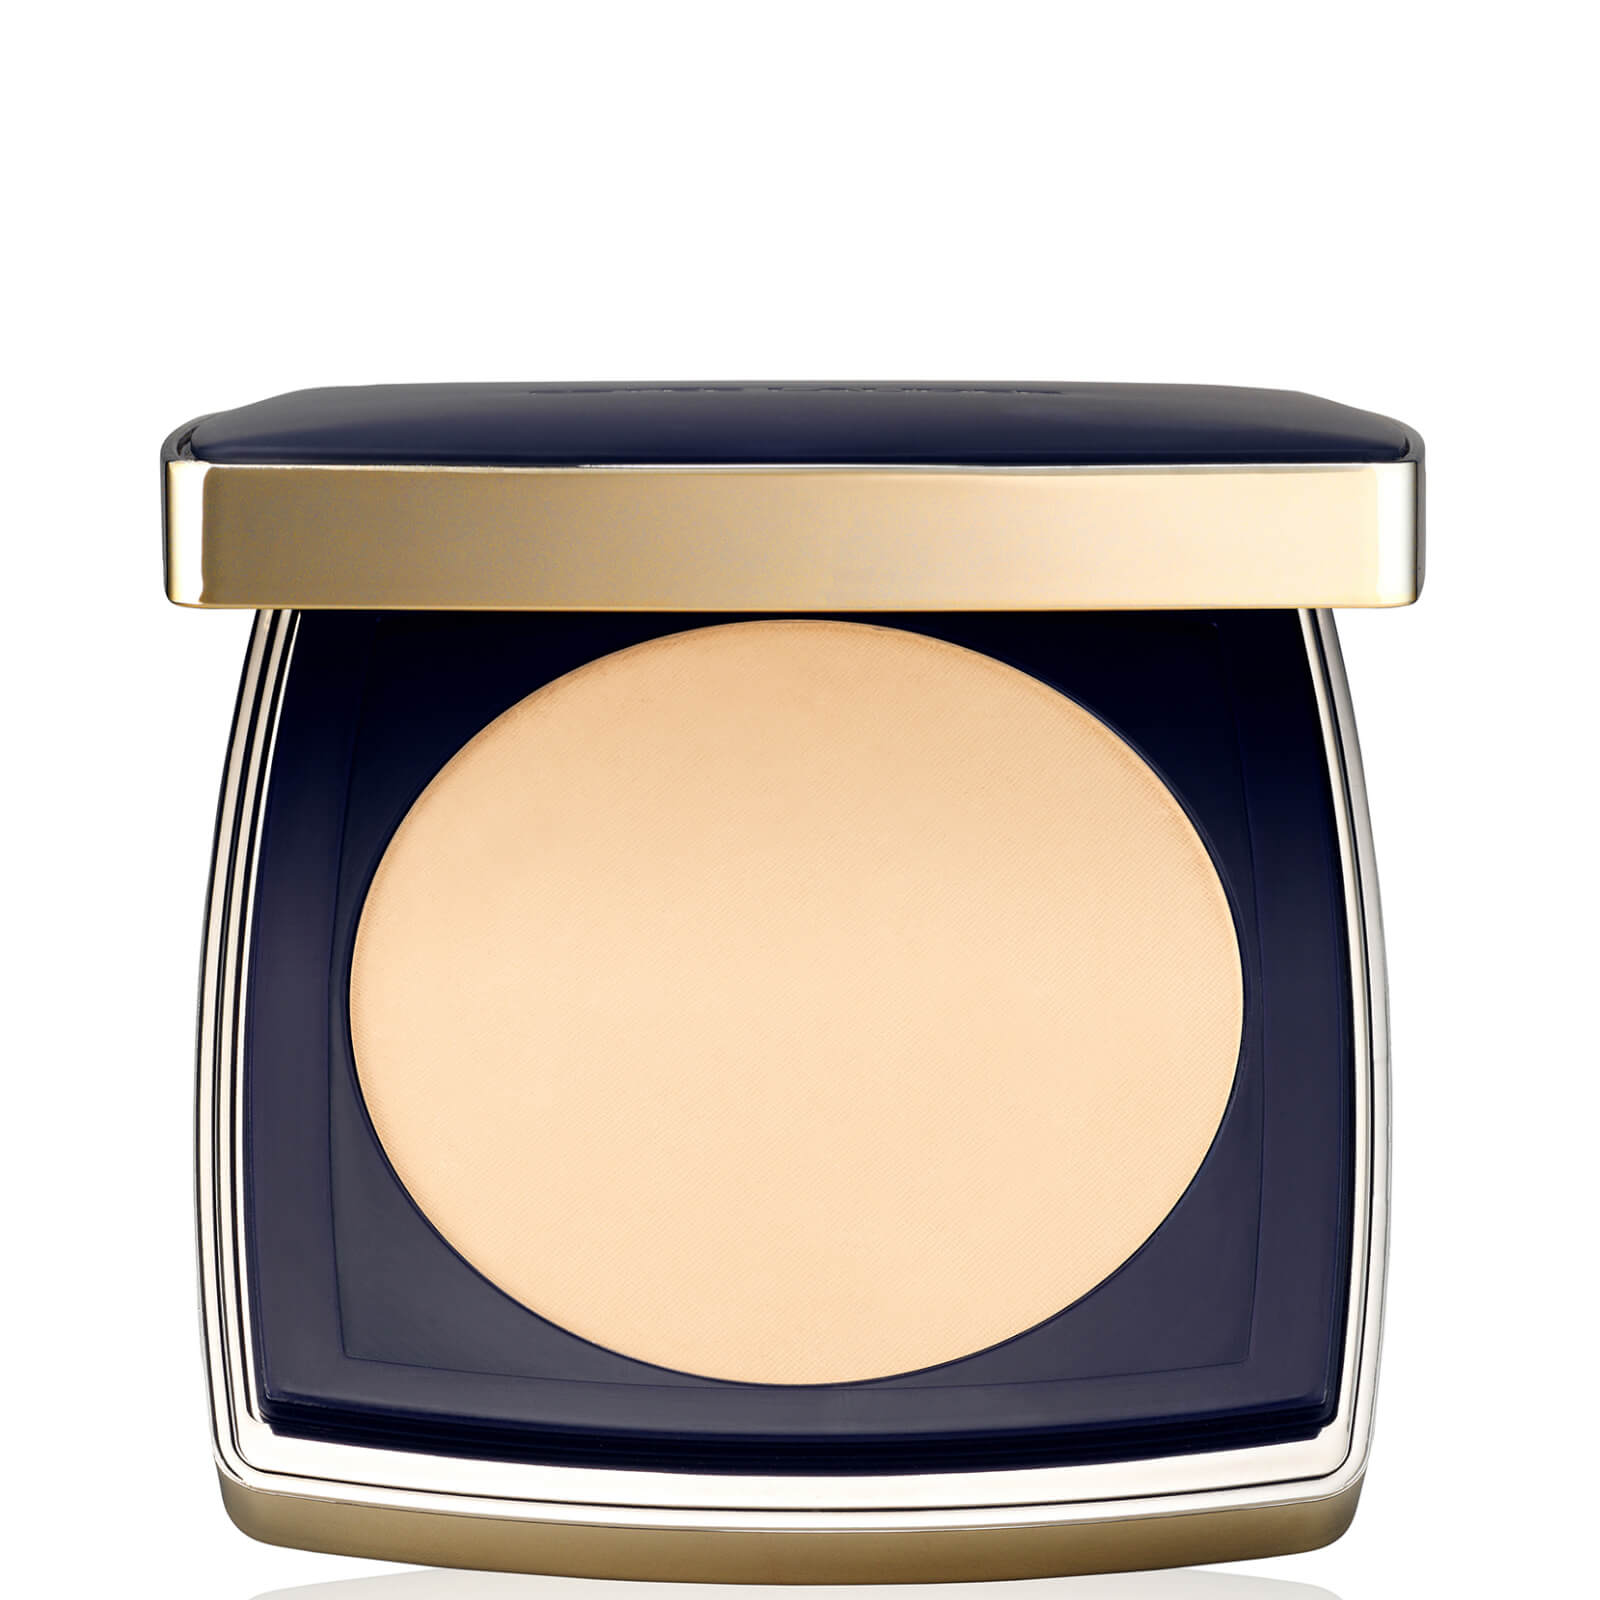 Estee Lauder Double Wear Stay-in-Place Matte Powder Foundation SPF10 12g (Various Shades) - 2N1 Dese